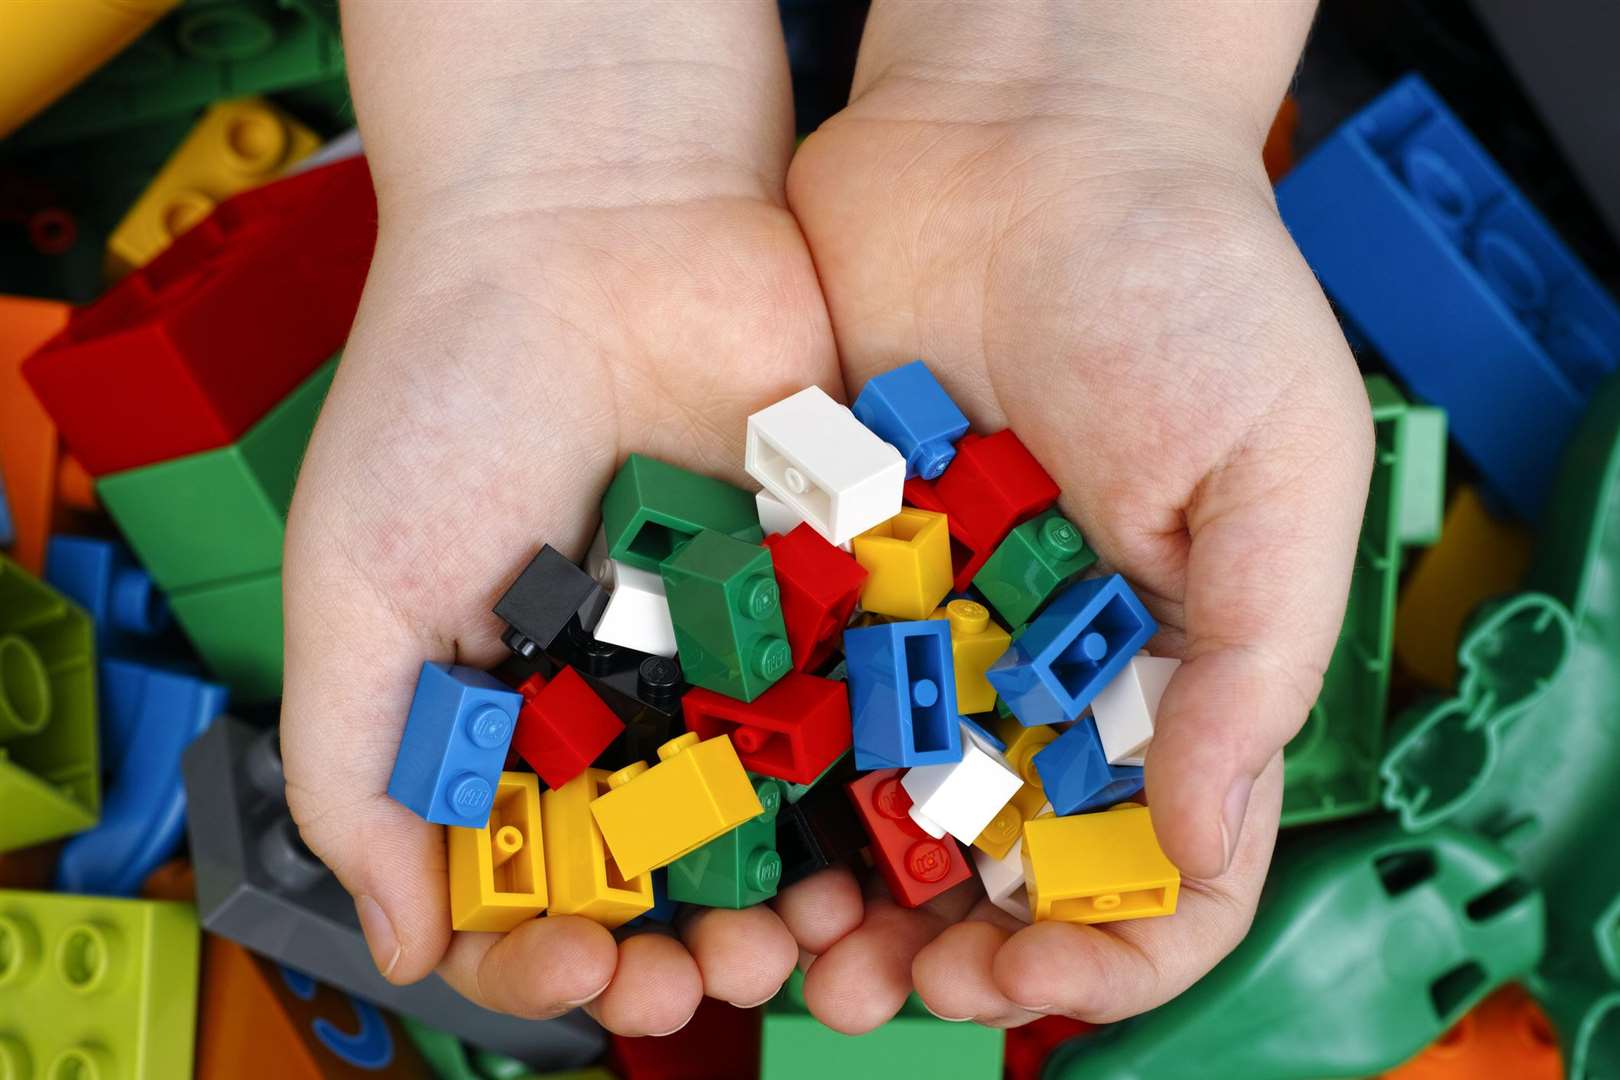 Brick building can help everything from motor skills to posture and dexterity